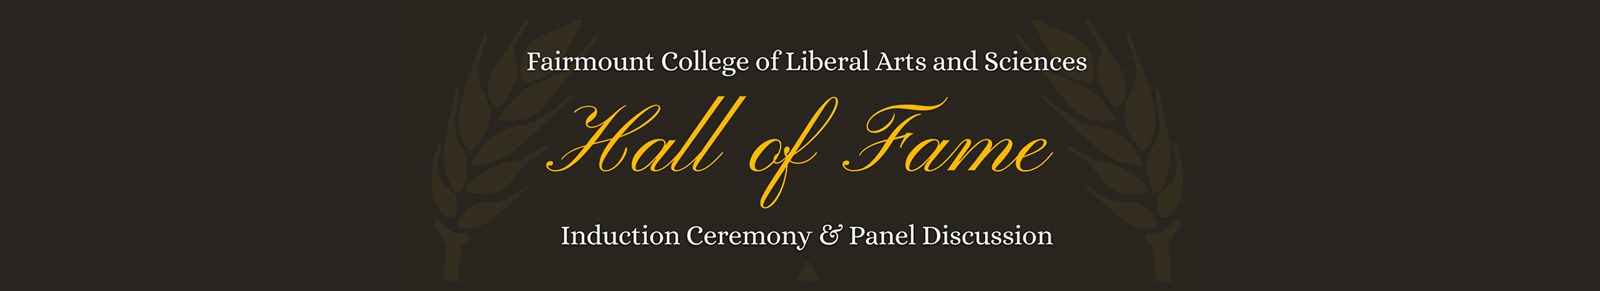 Hall of Fame event banner